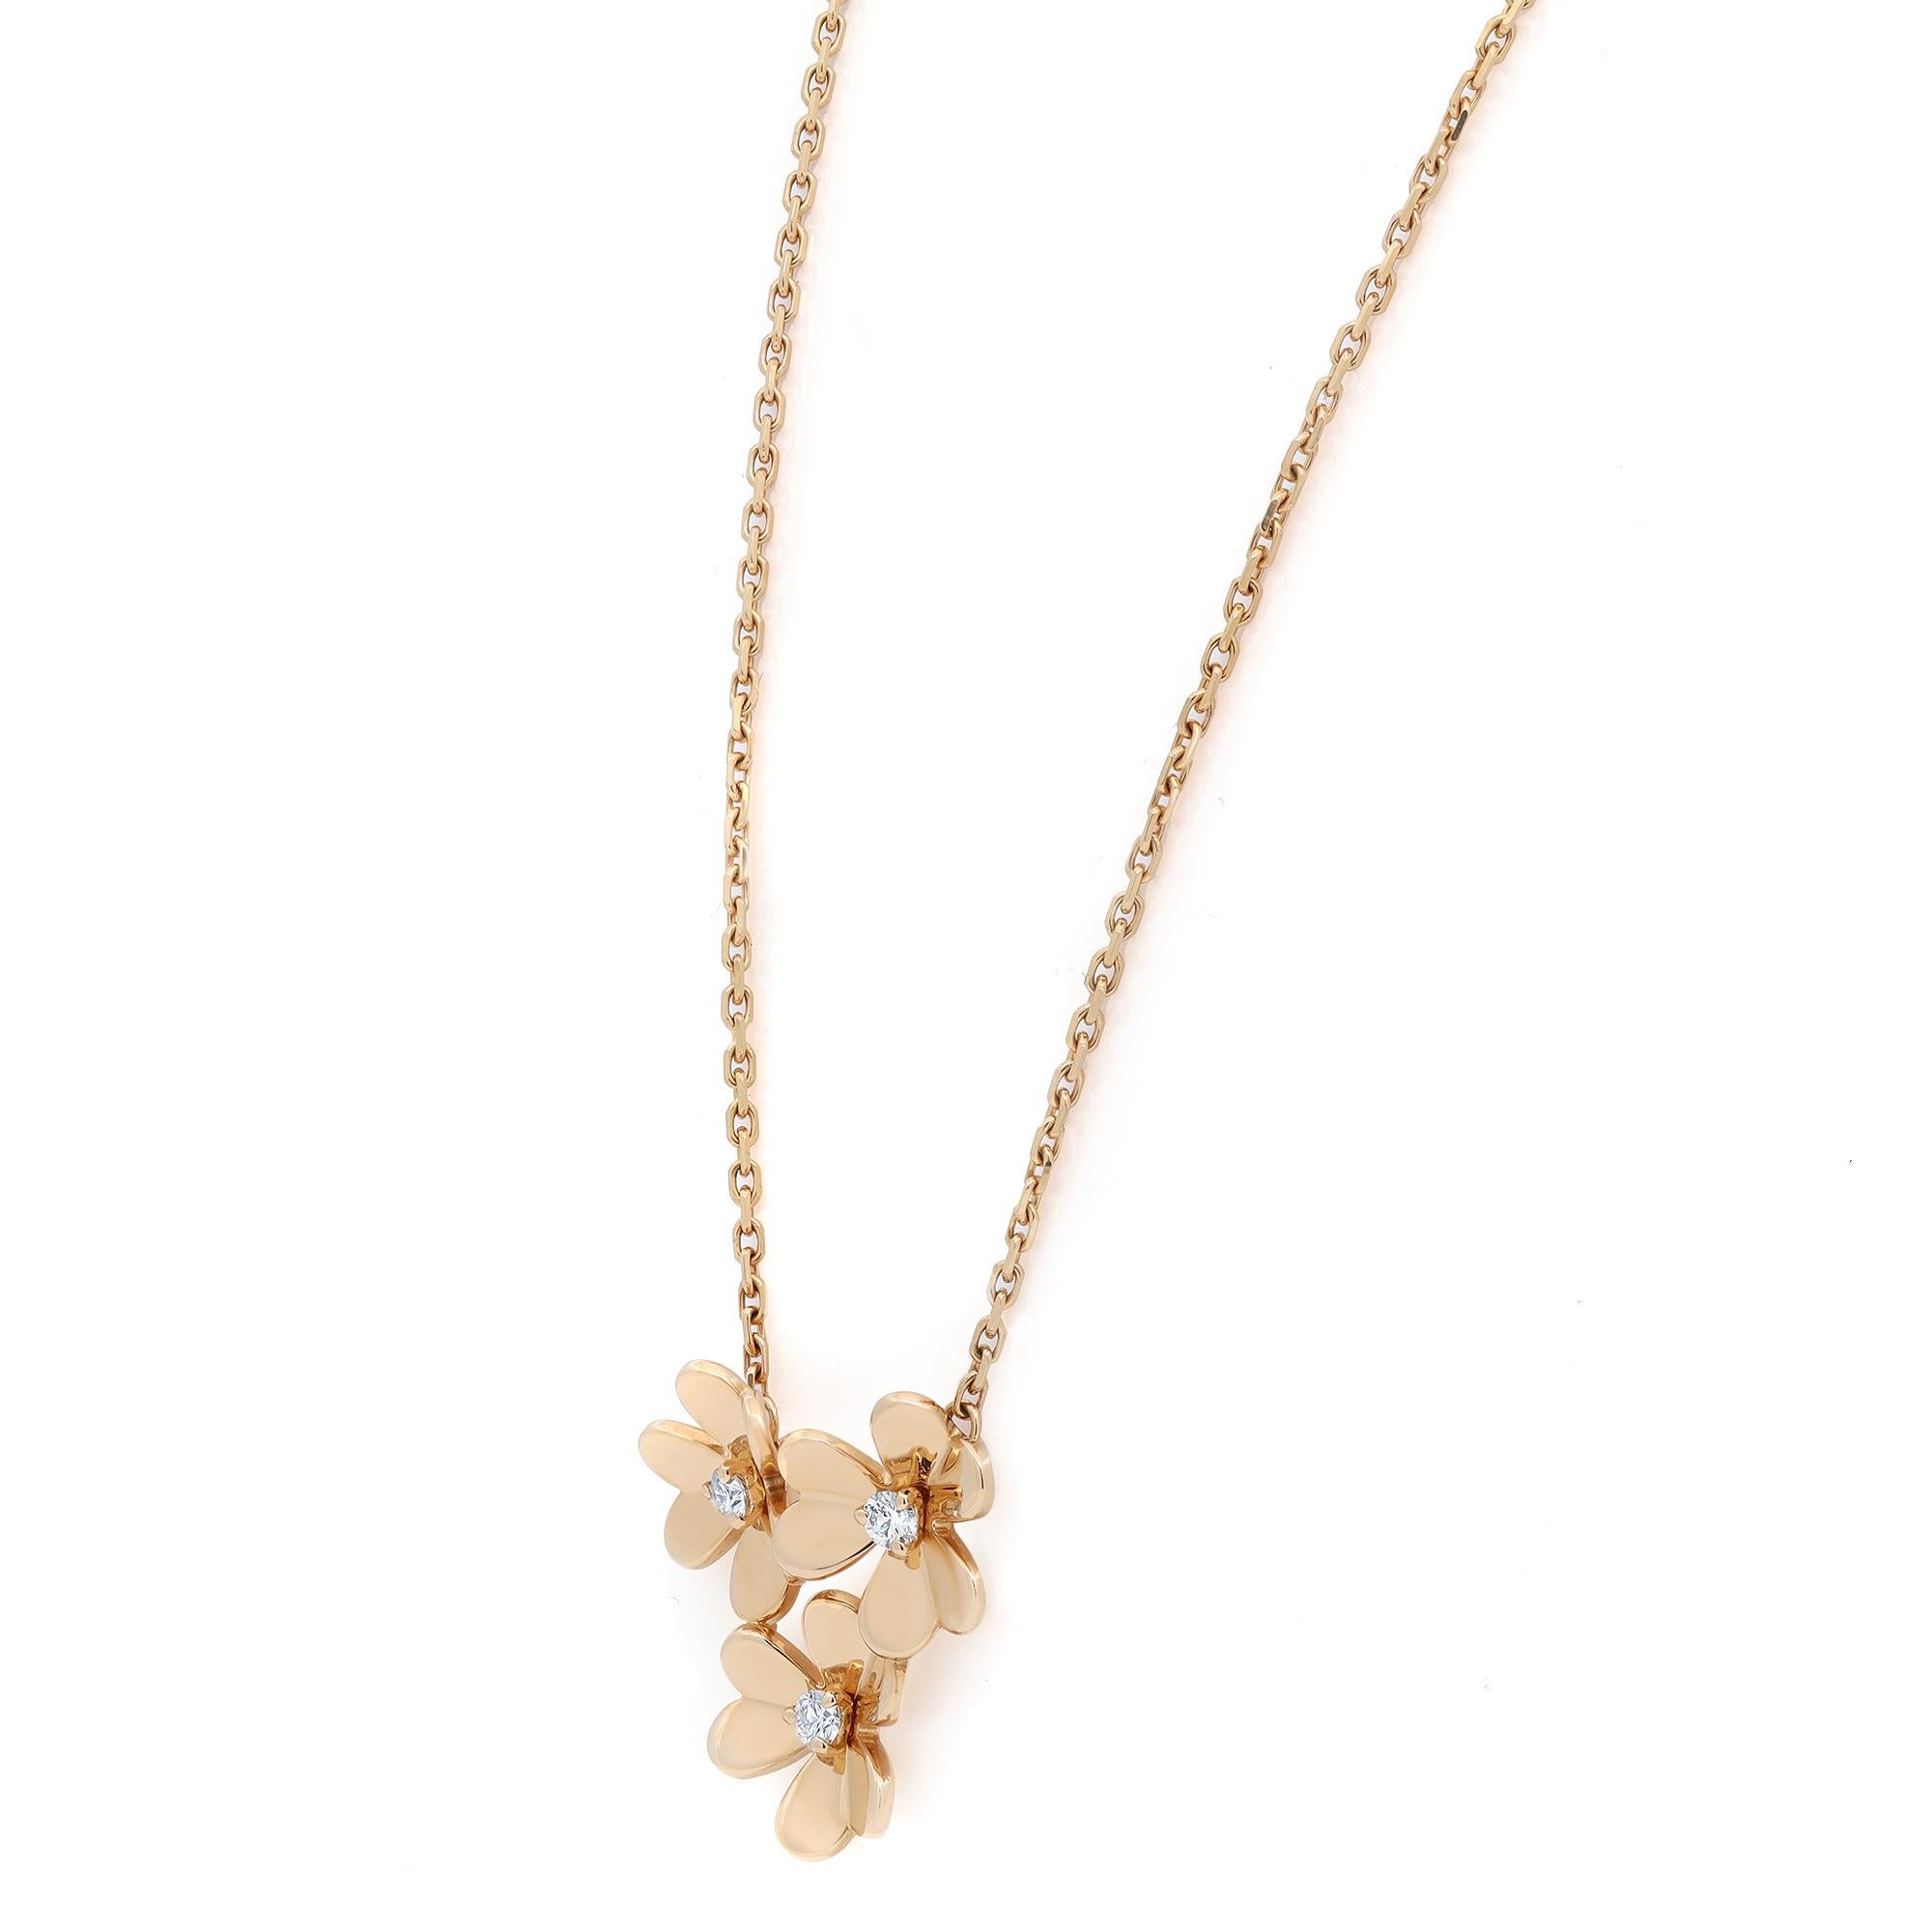 Like a bouquet of flowers dancing in the breeze, the Frivole collection by Van Cleef & Arpels stands out with its graphic yet airy aesthetic. This necklace features 3 round brilliant cut diamonds studded on heart shaped petals crafted in mirror